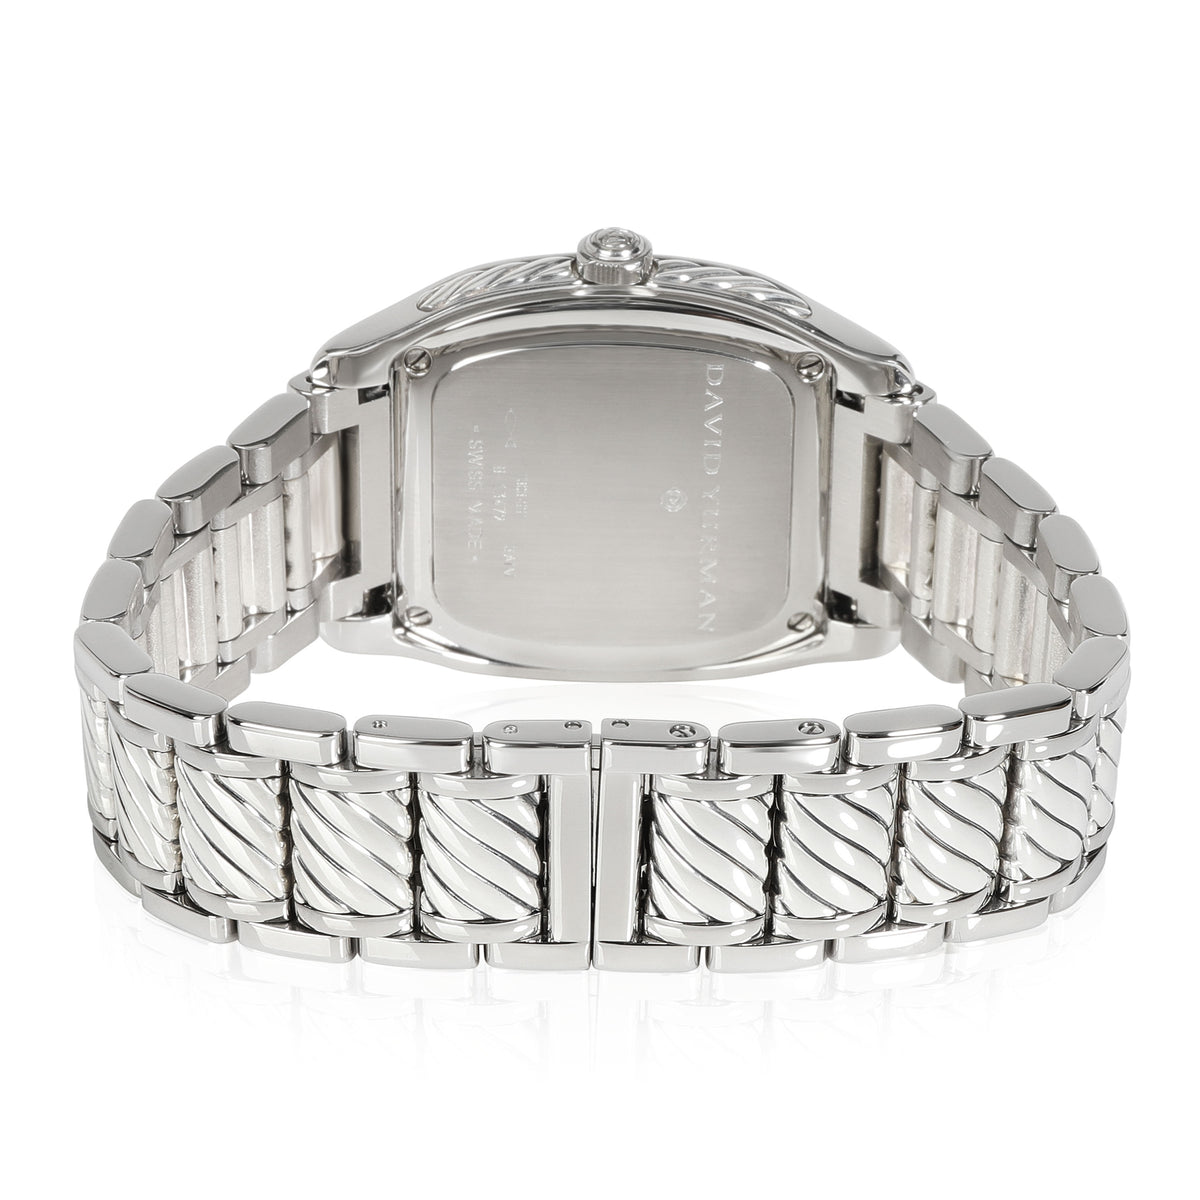 David Yurman Thoroughbred T303-SST Unisex Watch in  Sterling Silver/Stainless St